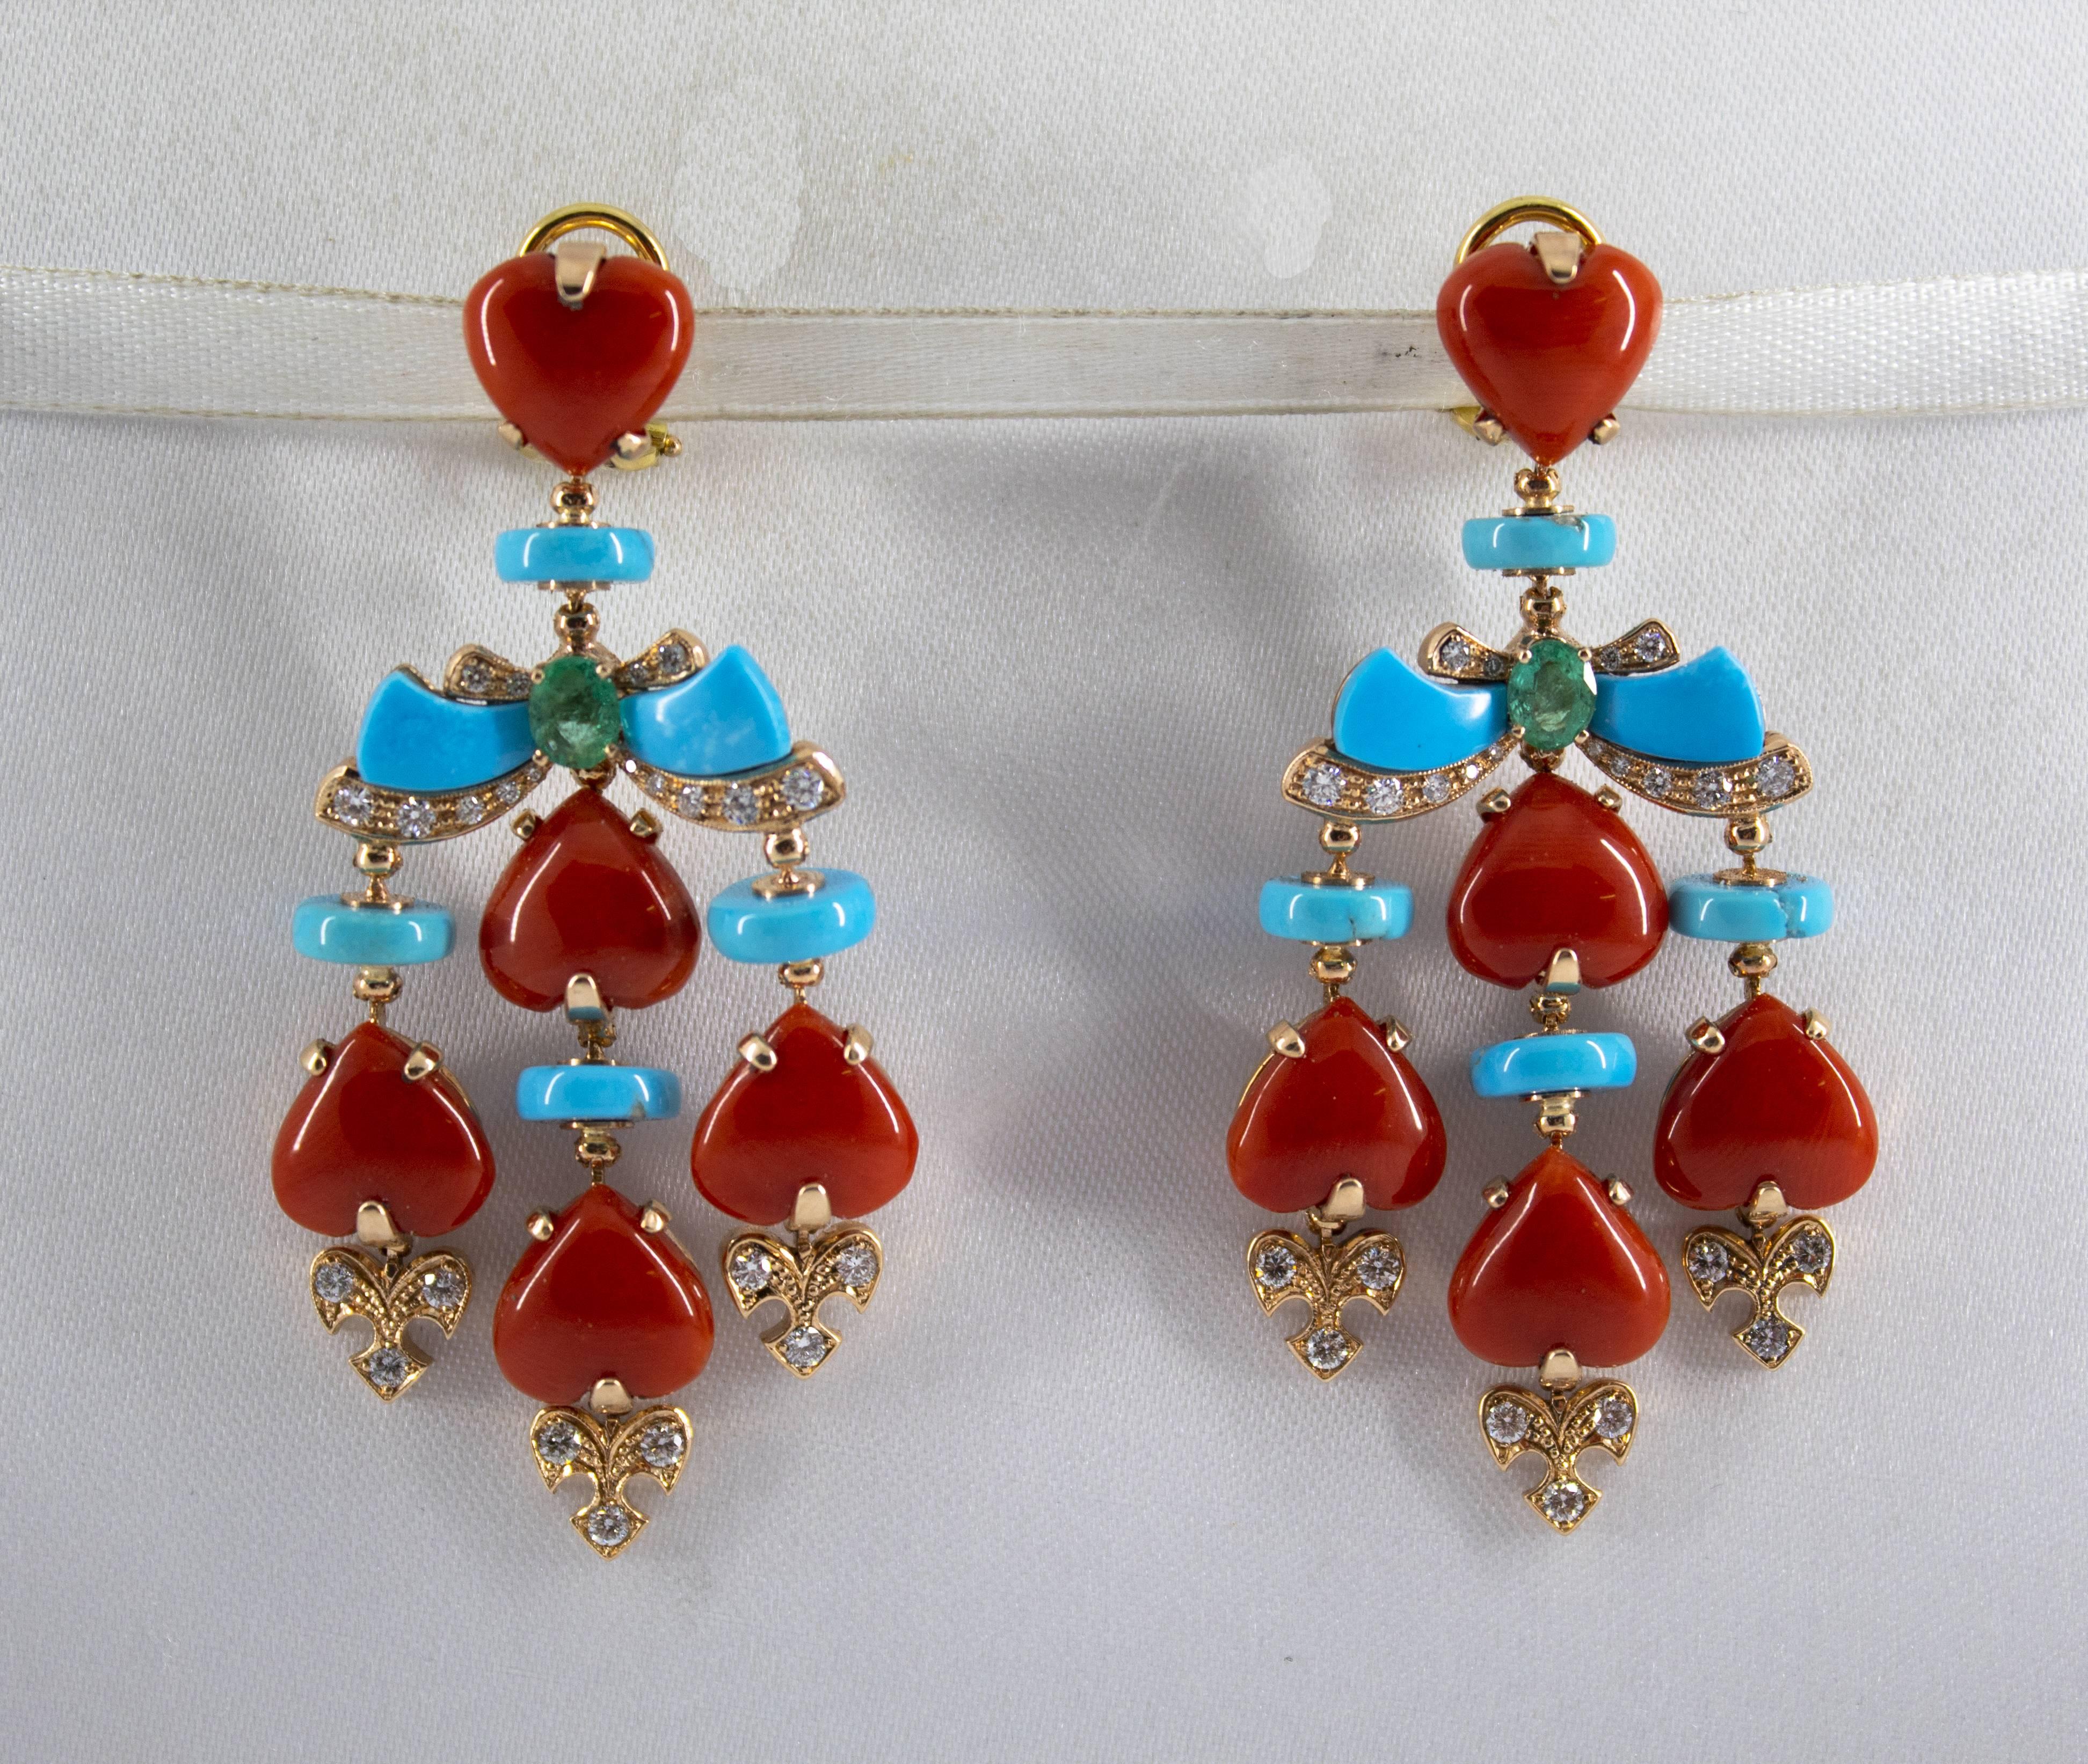 These Earrings are made of 14K Yellow Gold.
These Earrings have 0.82 Carats of Diamonds.
These Earrings have 0.70 Carats of Emeralds.
These Earrings have also Mediterranean (Sardinia, Italy) Red Coral and Turquoise.
All our Earrings have pins for